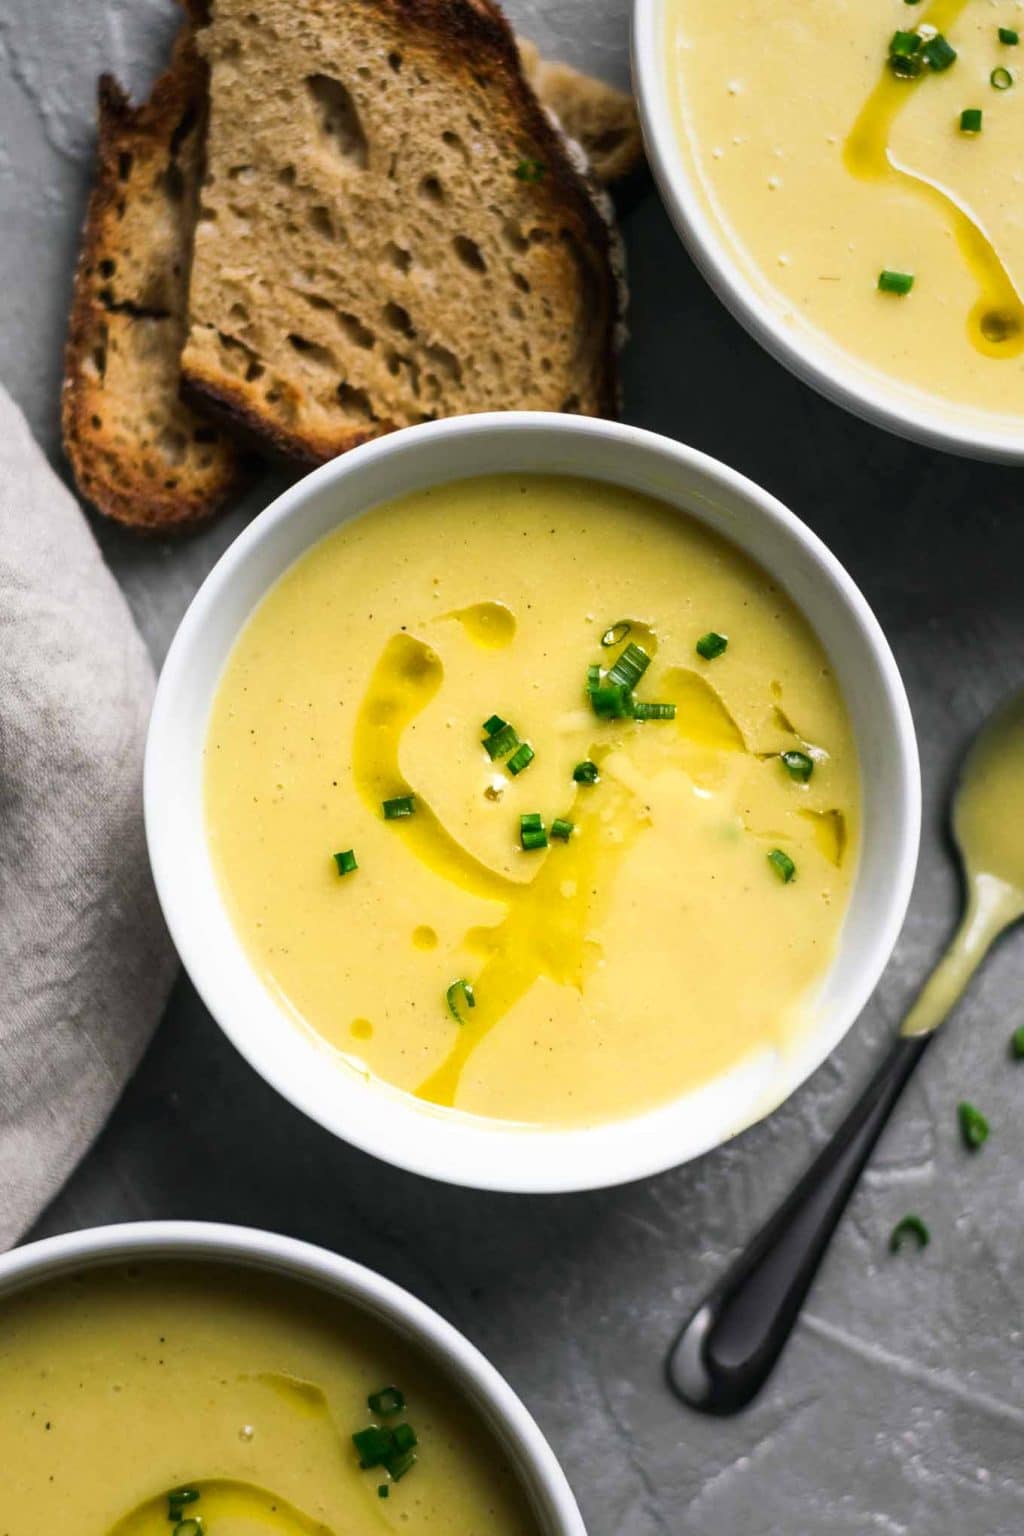 Vegan potato leek soup garnishes with a swirl of olive oil and minced chives and served with garlic bread